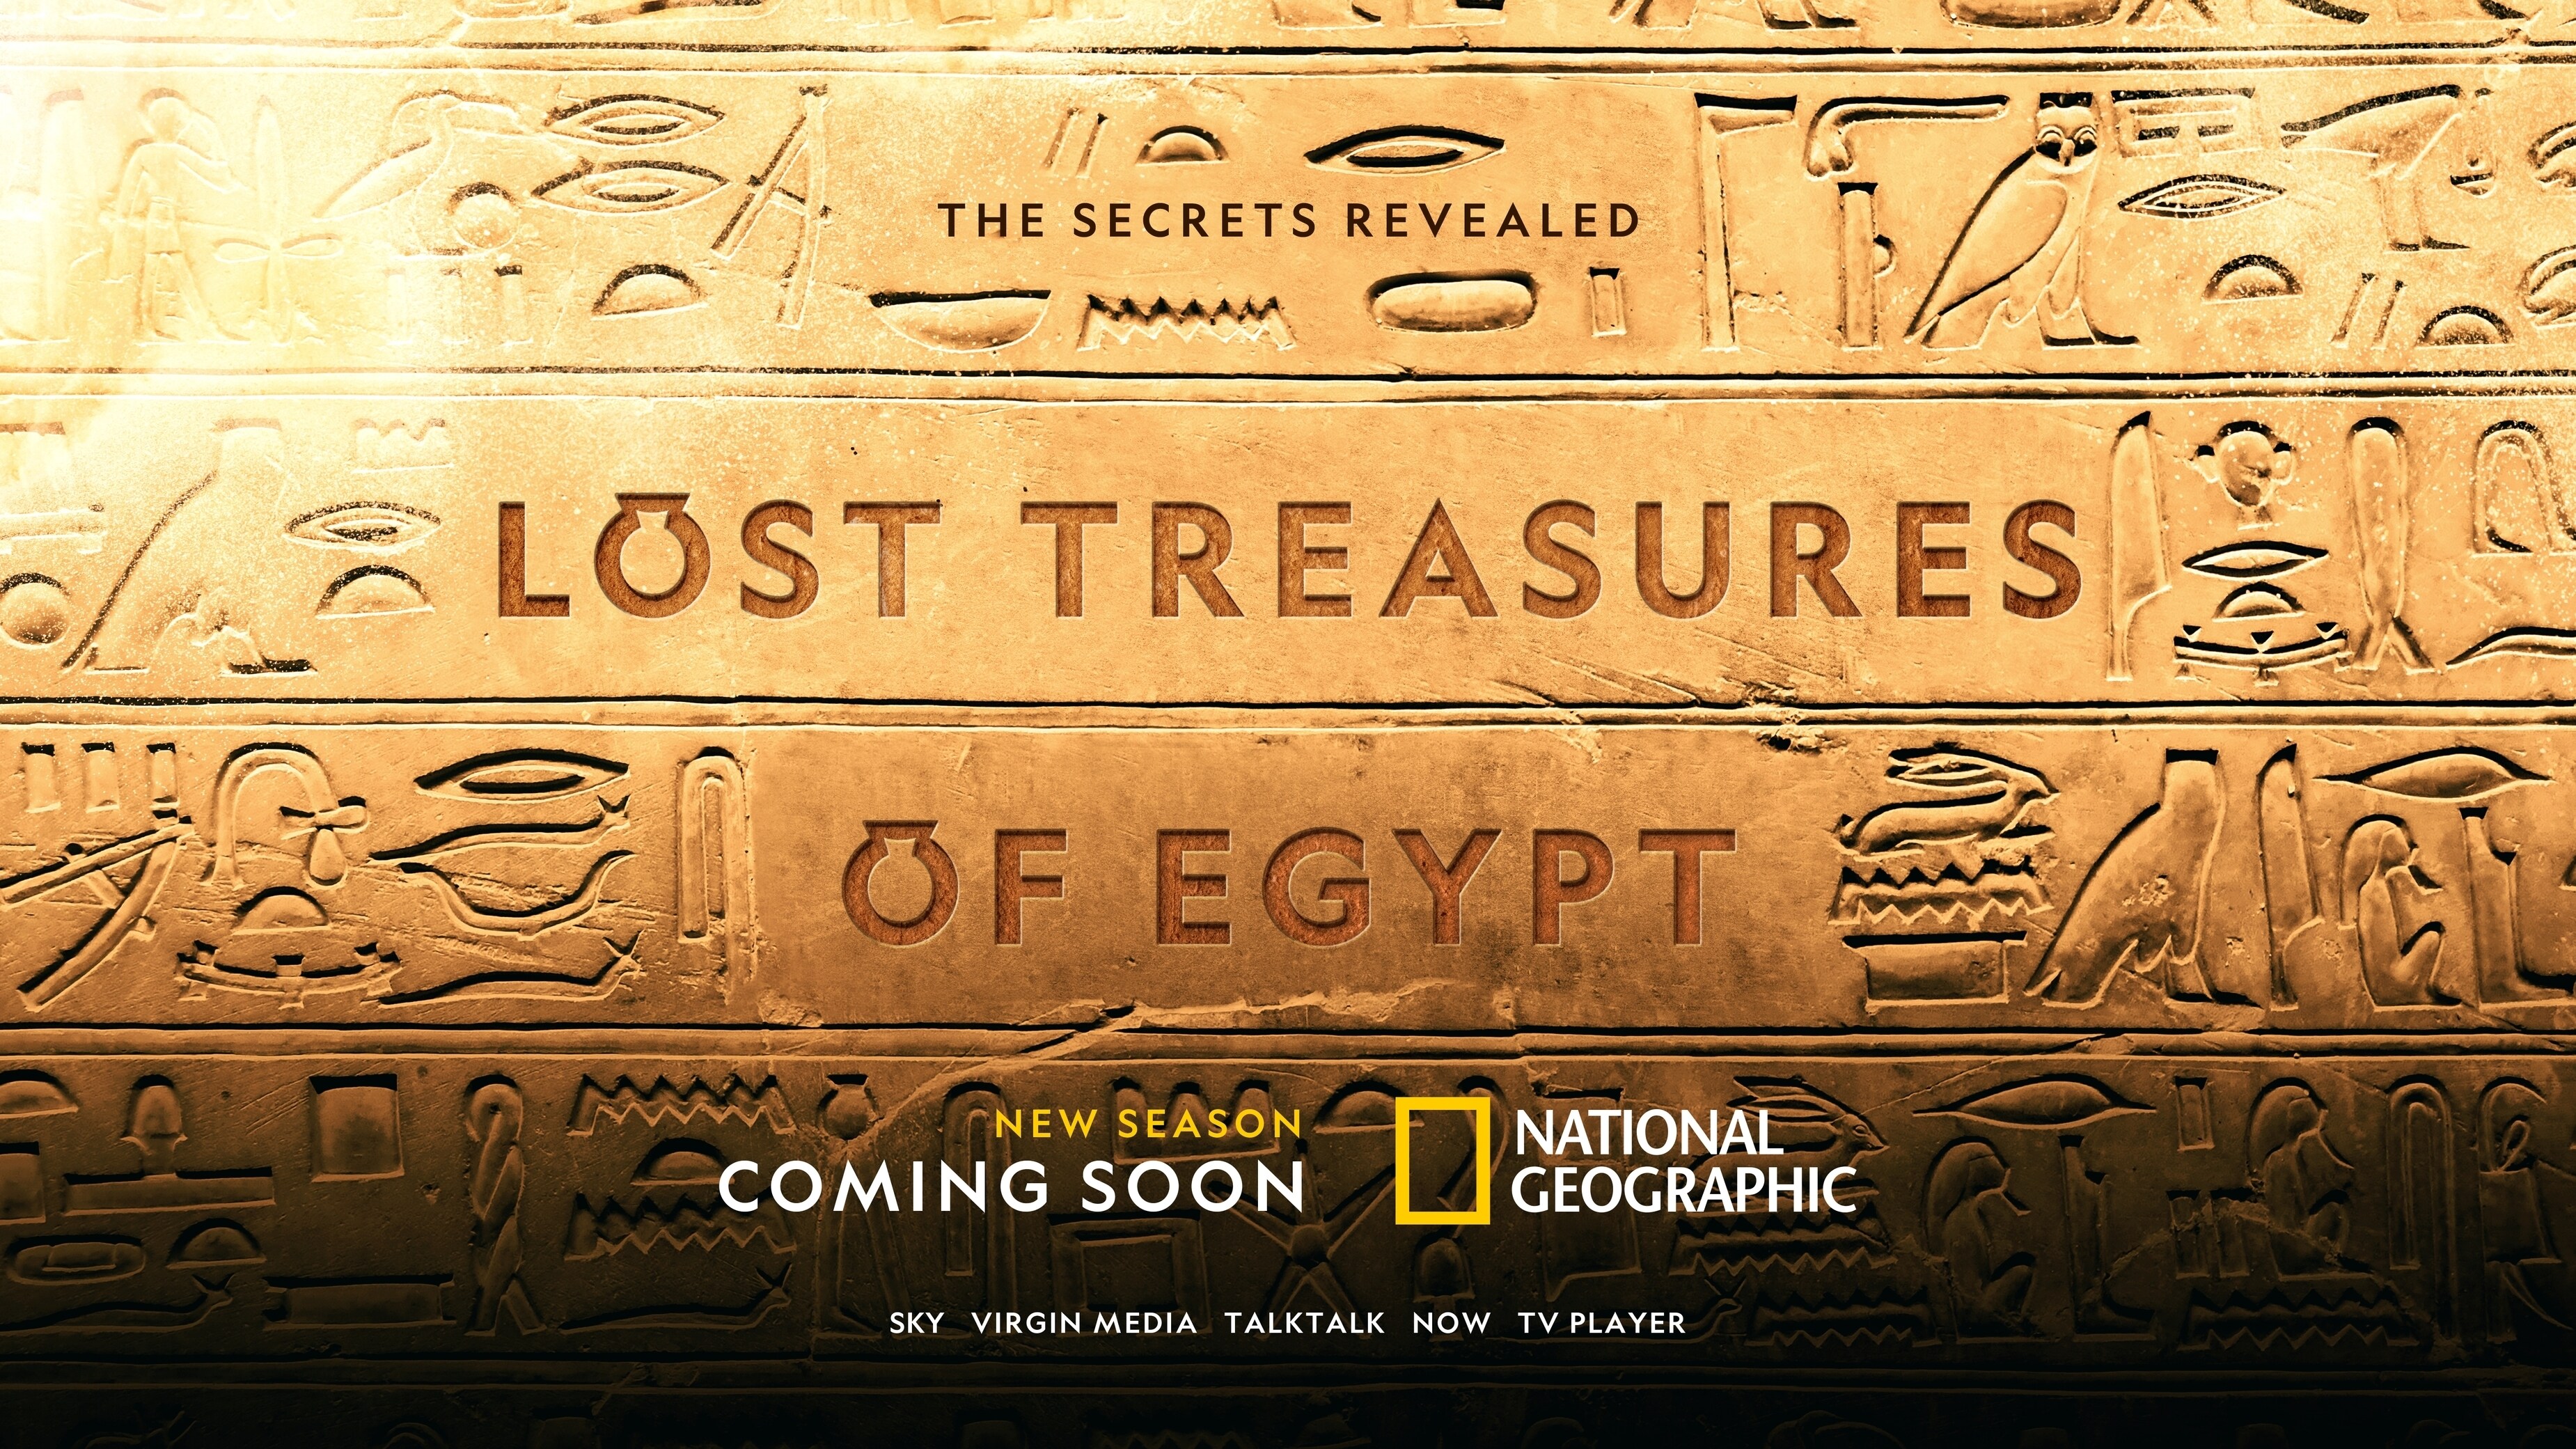 NATIONAL GEOGRAPHIC RETURNS AGAIN TO UNLOCK THE SECRETS OF ANCIENT EGYPT IN THE ACTION-PACKED THIRD SEASON OF ‘LOST TREASURES OF EGYPT’